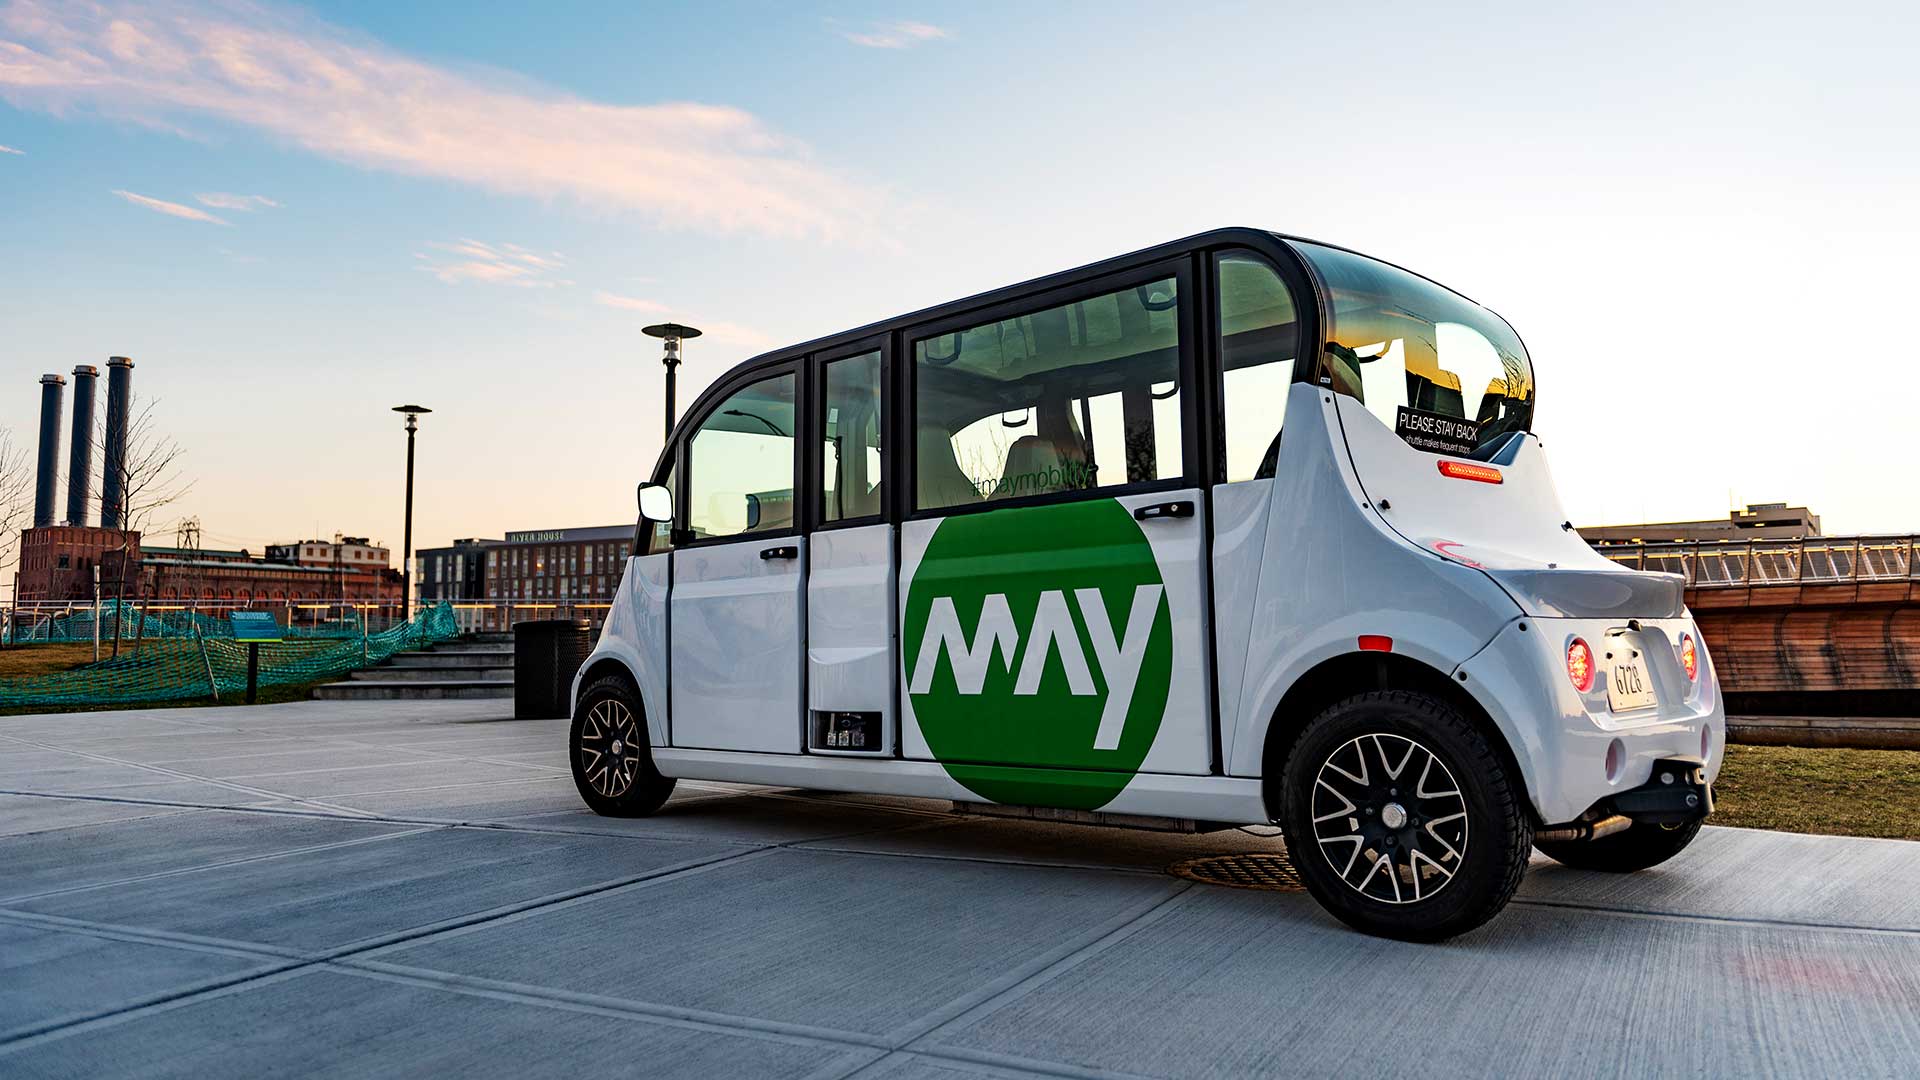 May Mobility Gains Momentum In Autonomous Vehicle Market